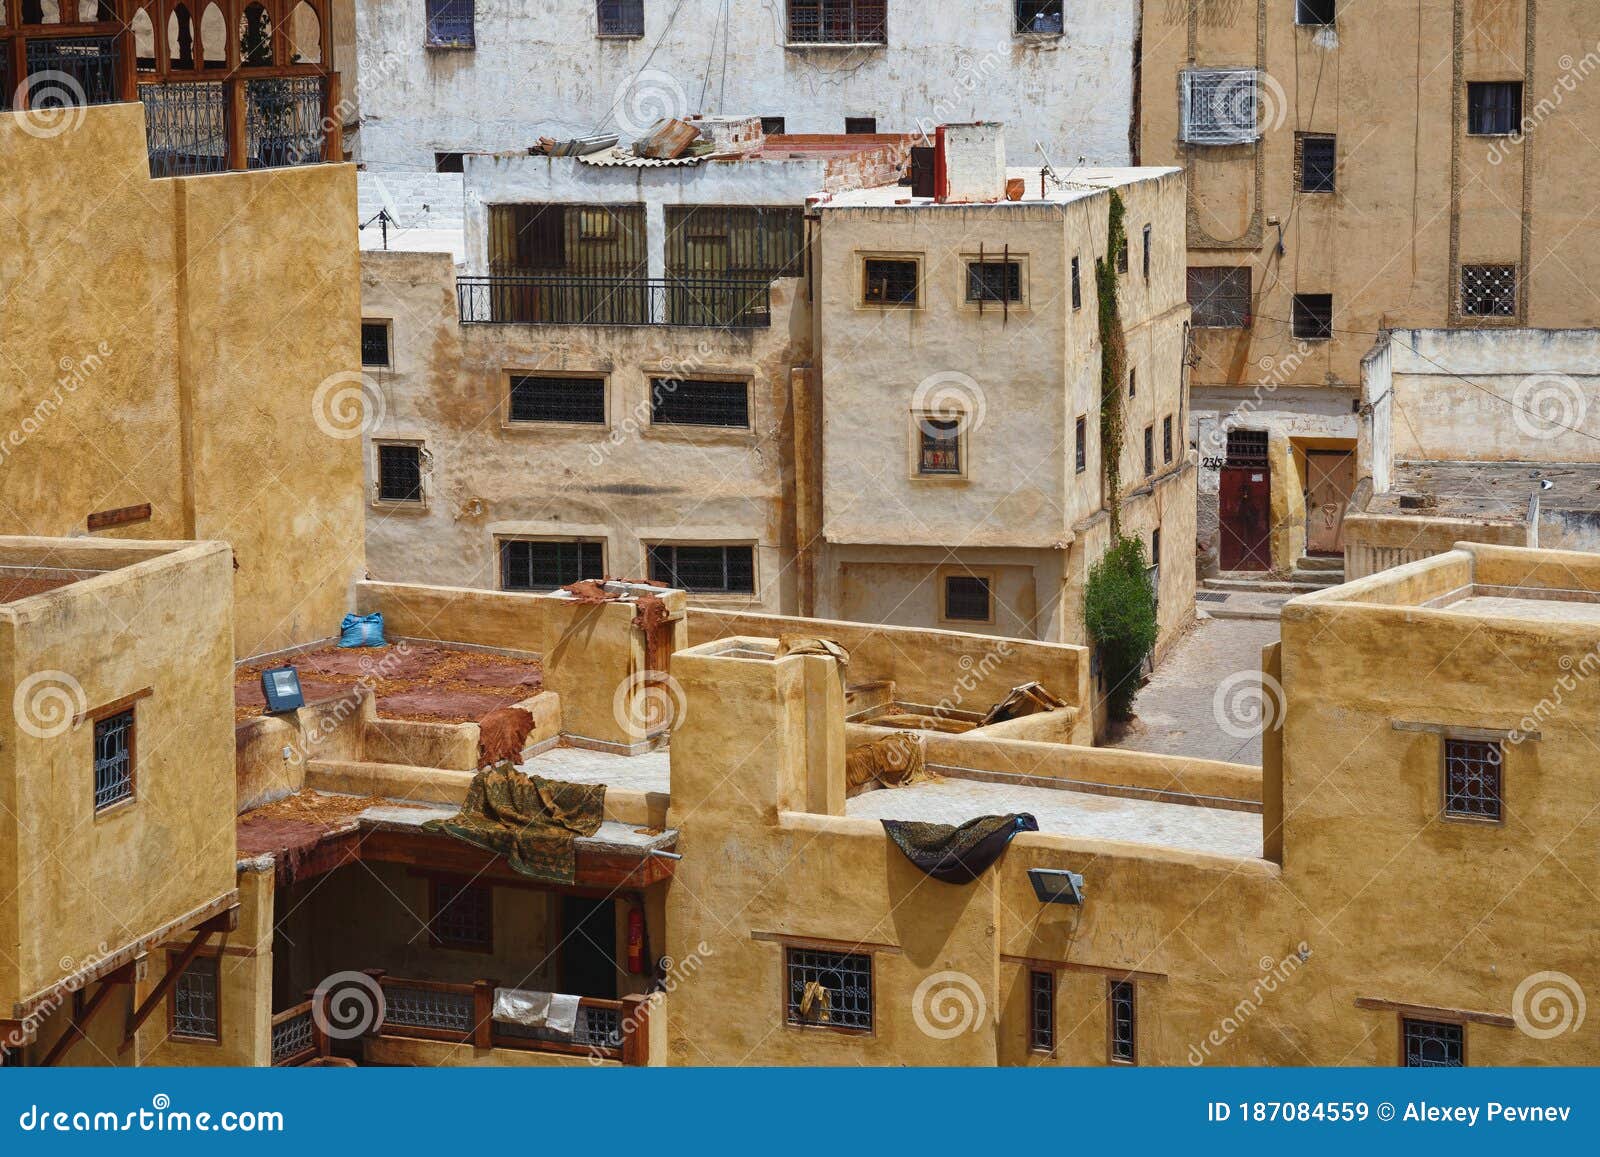 the leathers are dried on the roofs of the old tannery buildings in fez. morocco. the tanning industry in the city is considered